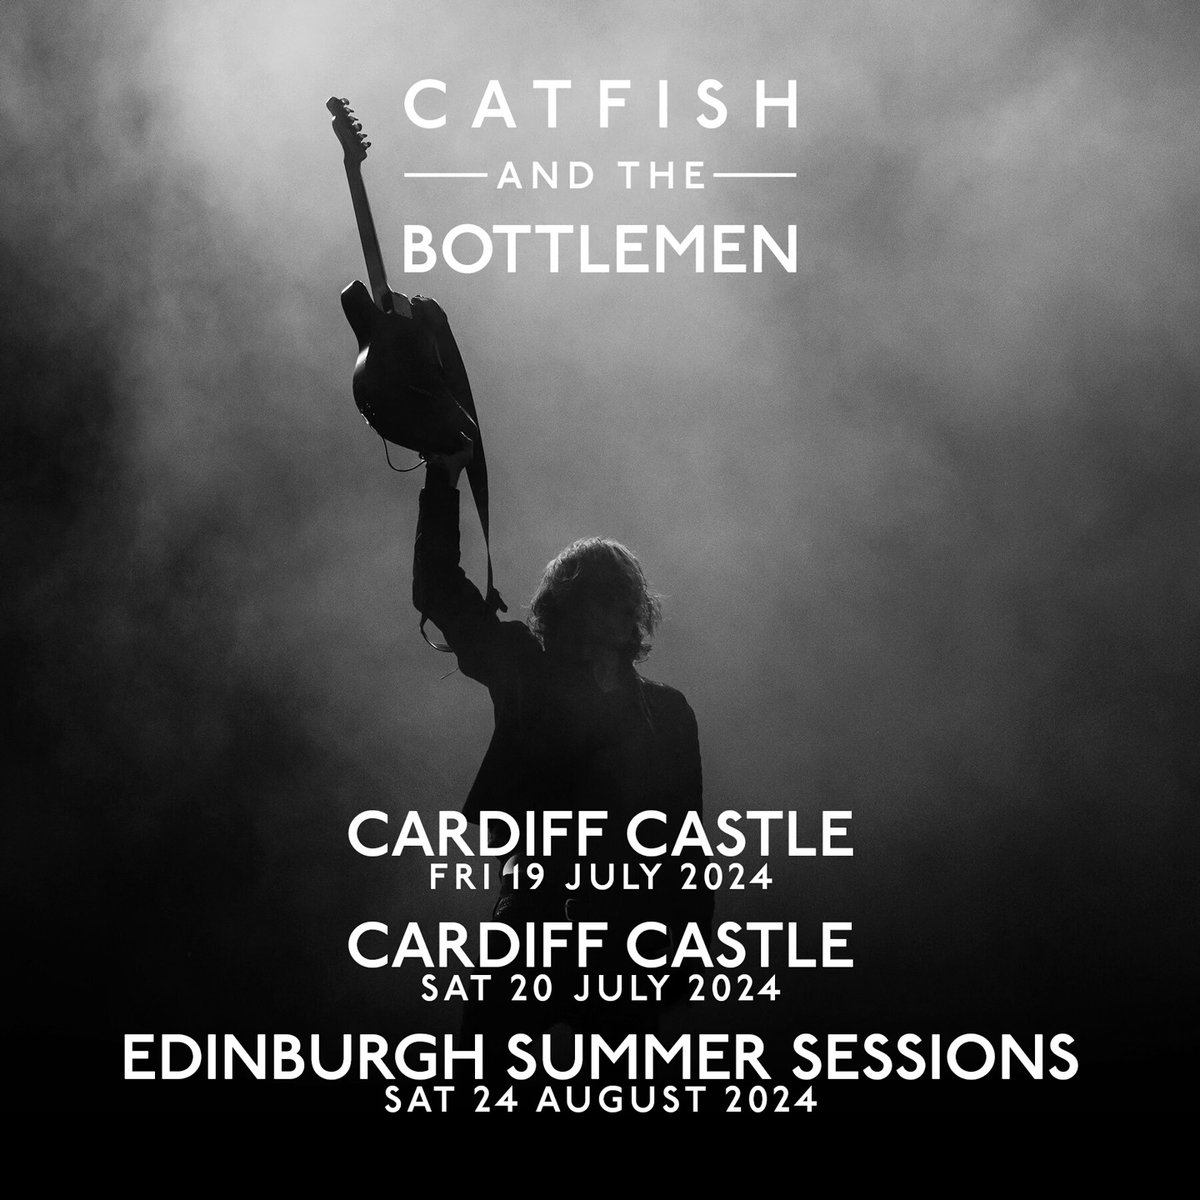 TICKETS ON SALE 10AM shops.ticketmasterpartners.com/catfish-and-th…